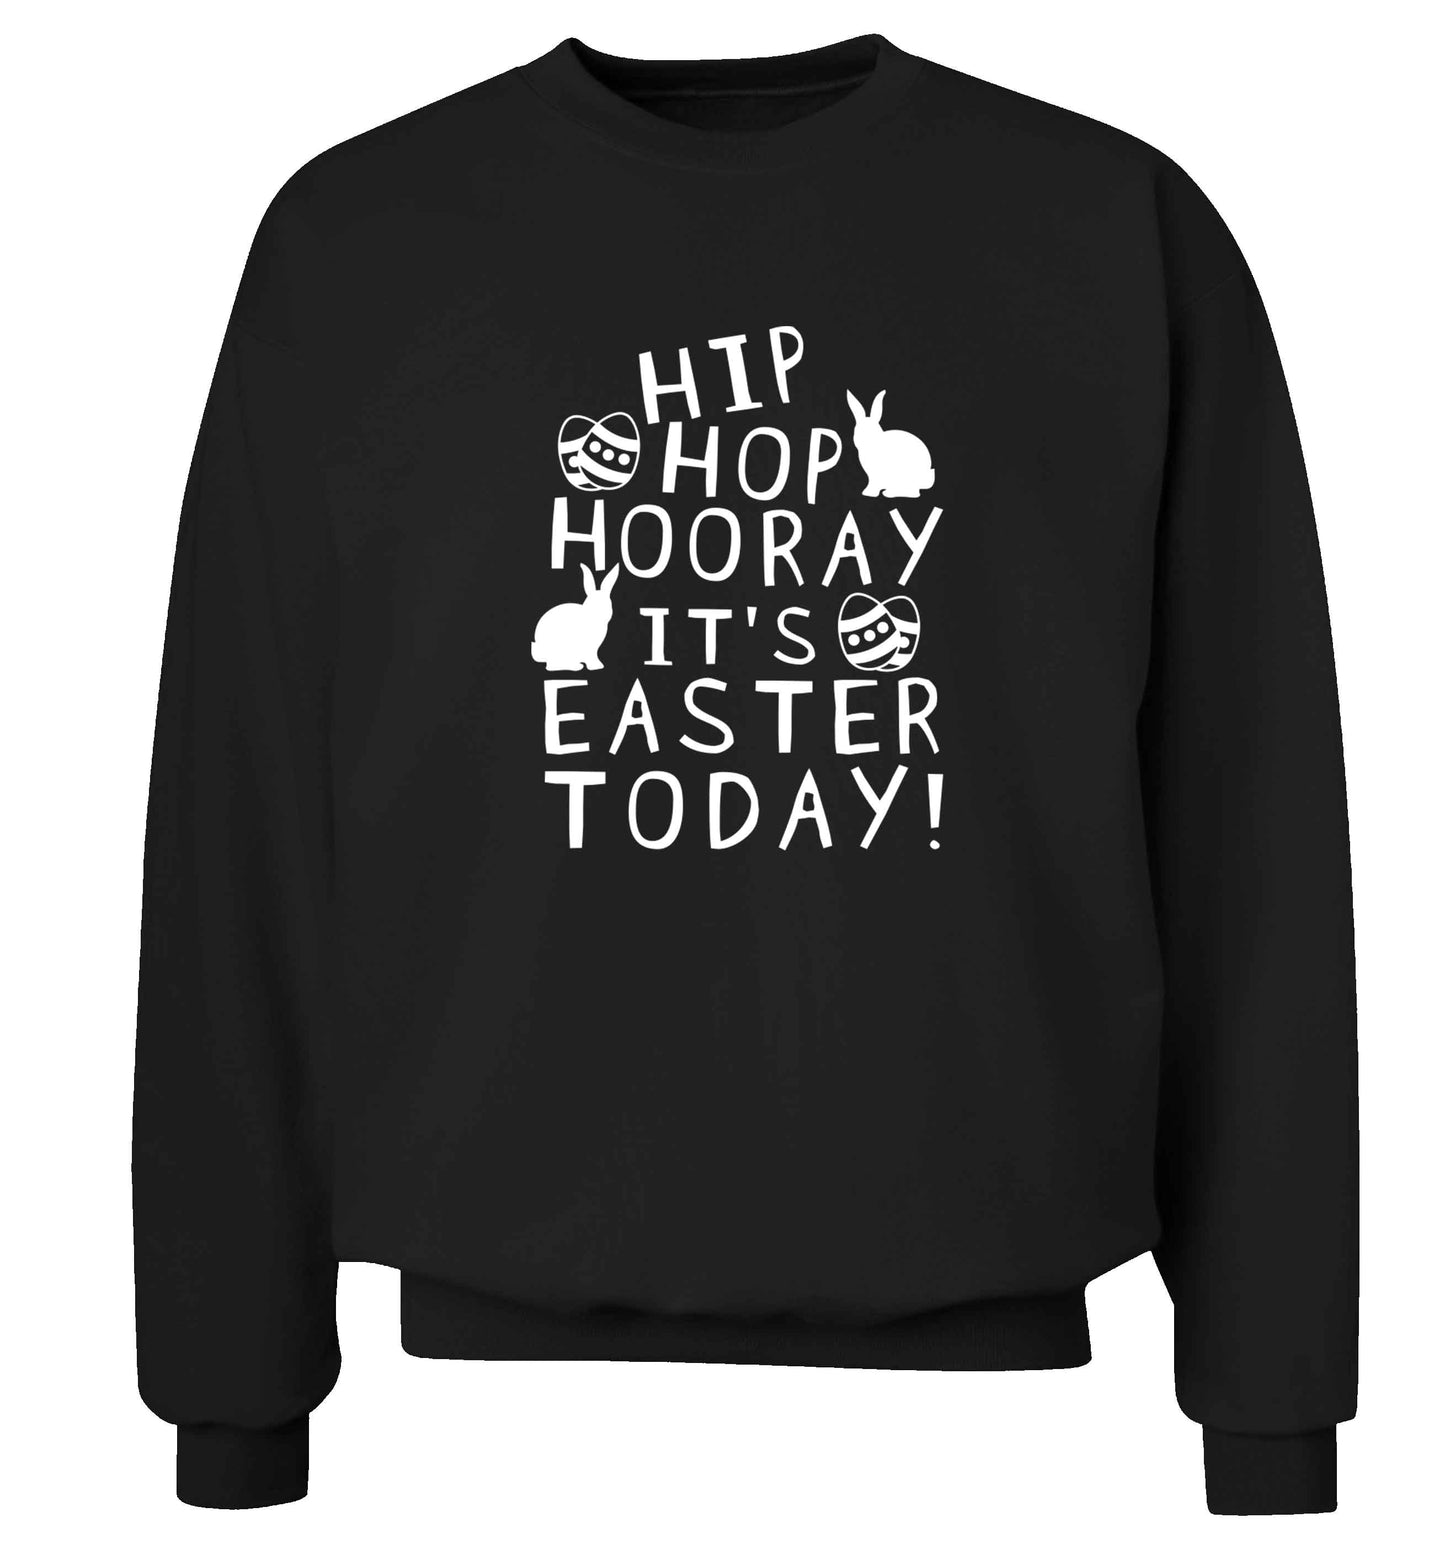 Hip hip hooray it's Easter today! adult's unisex black sweater 2XL